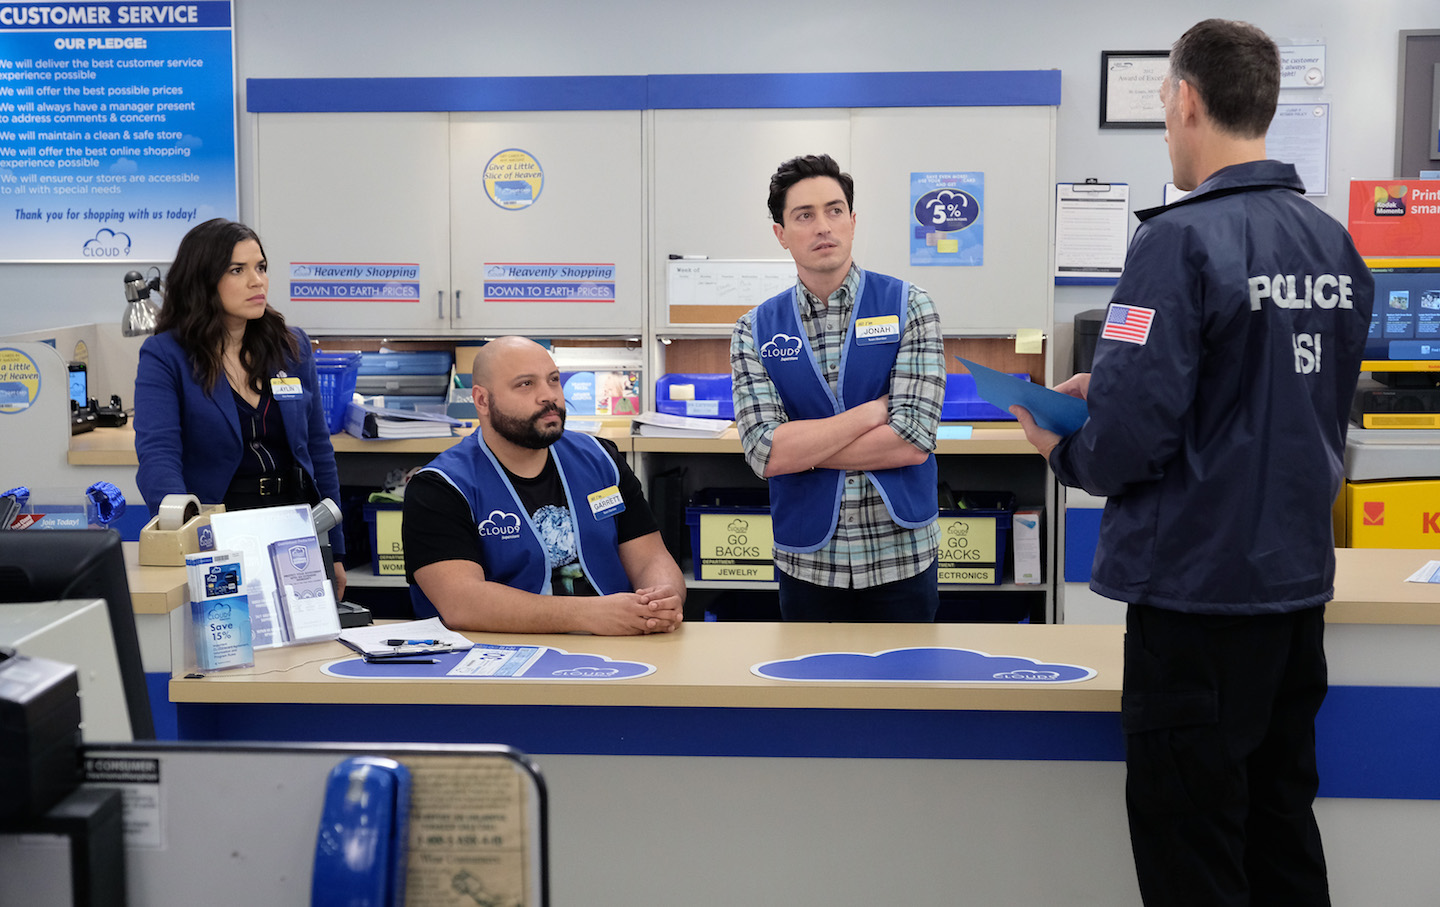 ‘Superstore’ Is the Only Sitcom That Gets Progressive Politics